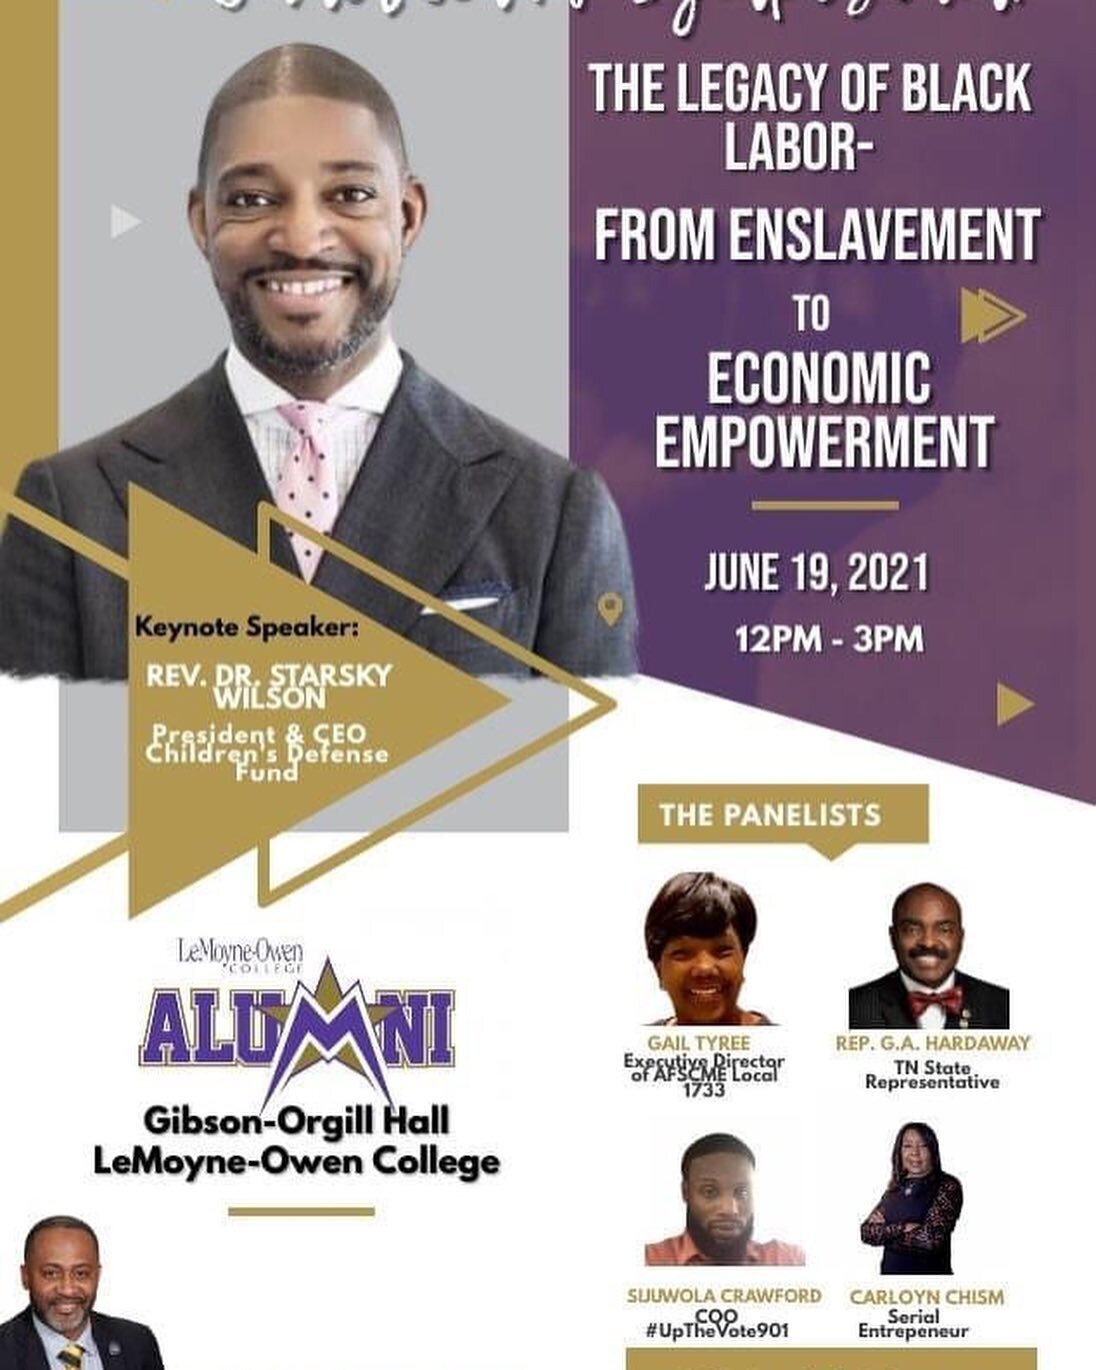 #Memphis family: Meet me at @lemoyneowencollege tomorrow for a #Juneteenth celebration &amp; conversation.

Talking #Legacy #BlackLabor #EconomicEmpowerment w/ my brother @pastor_earle 

#JoinUs